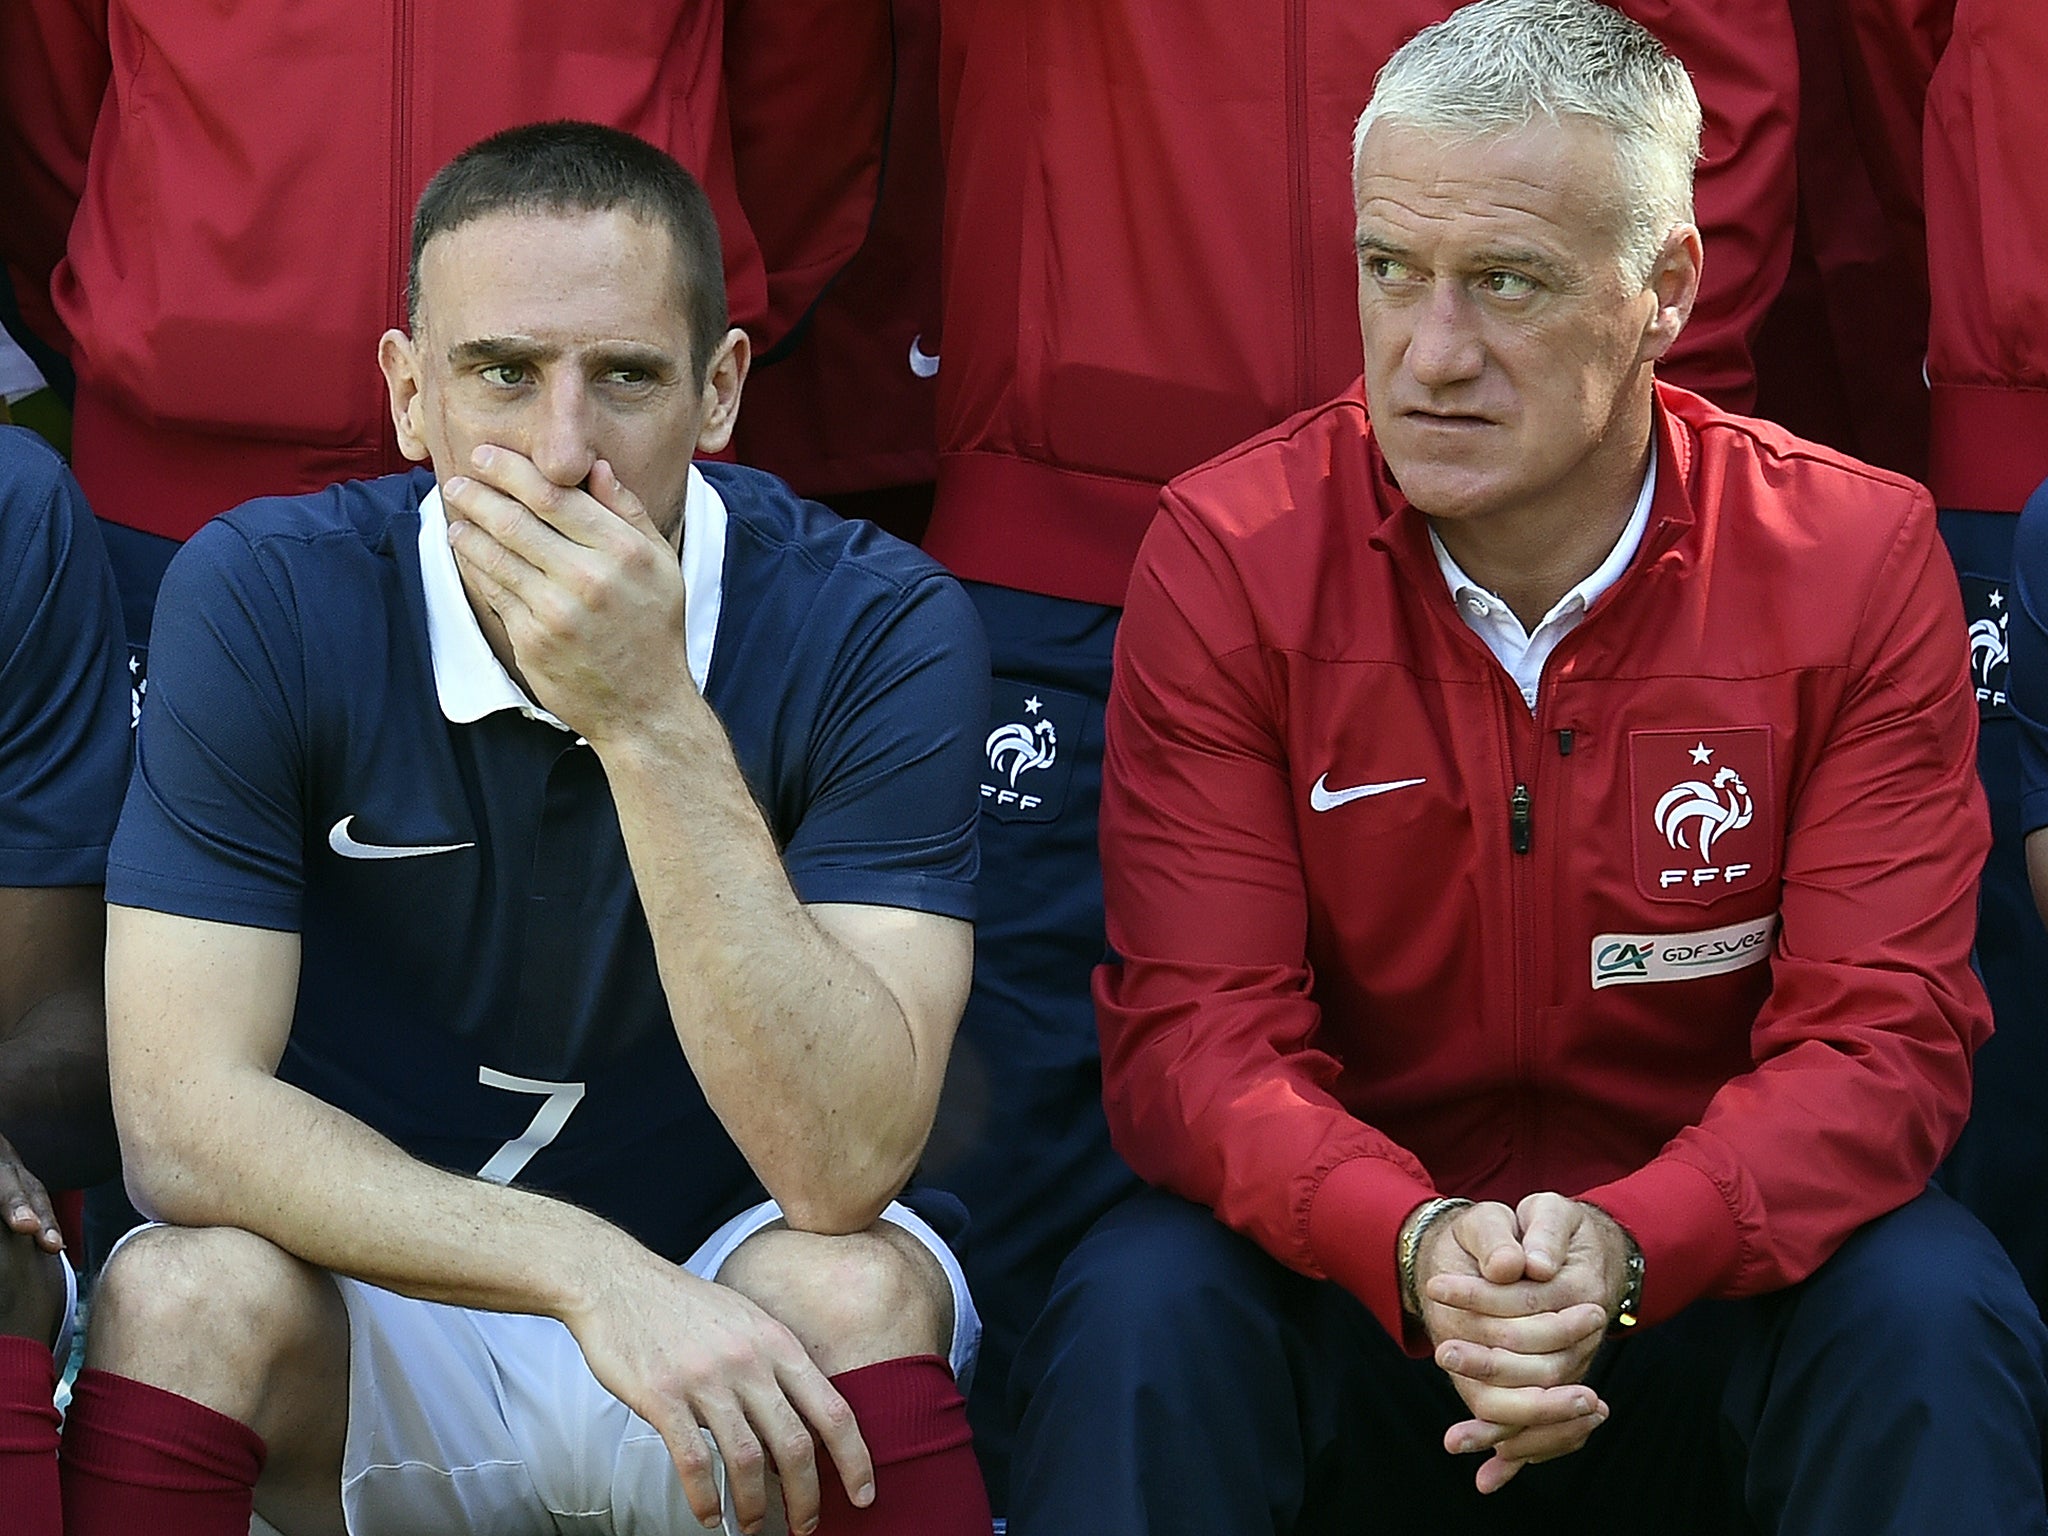 Franck Ribery alongside France's head coach Didier Deschamps for the pre-World Cup picture